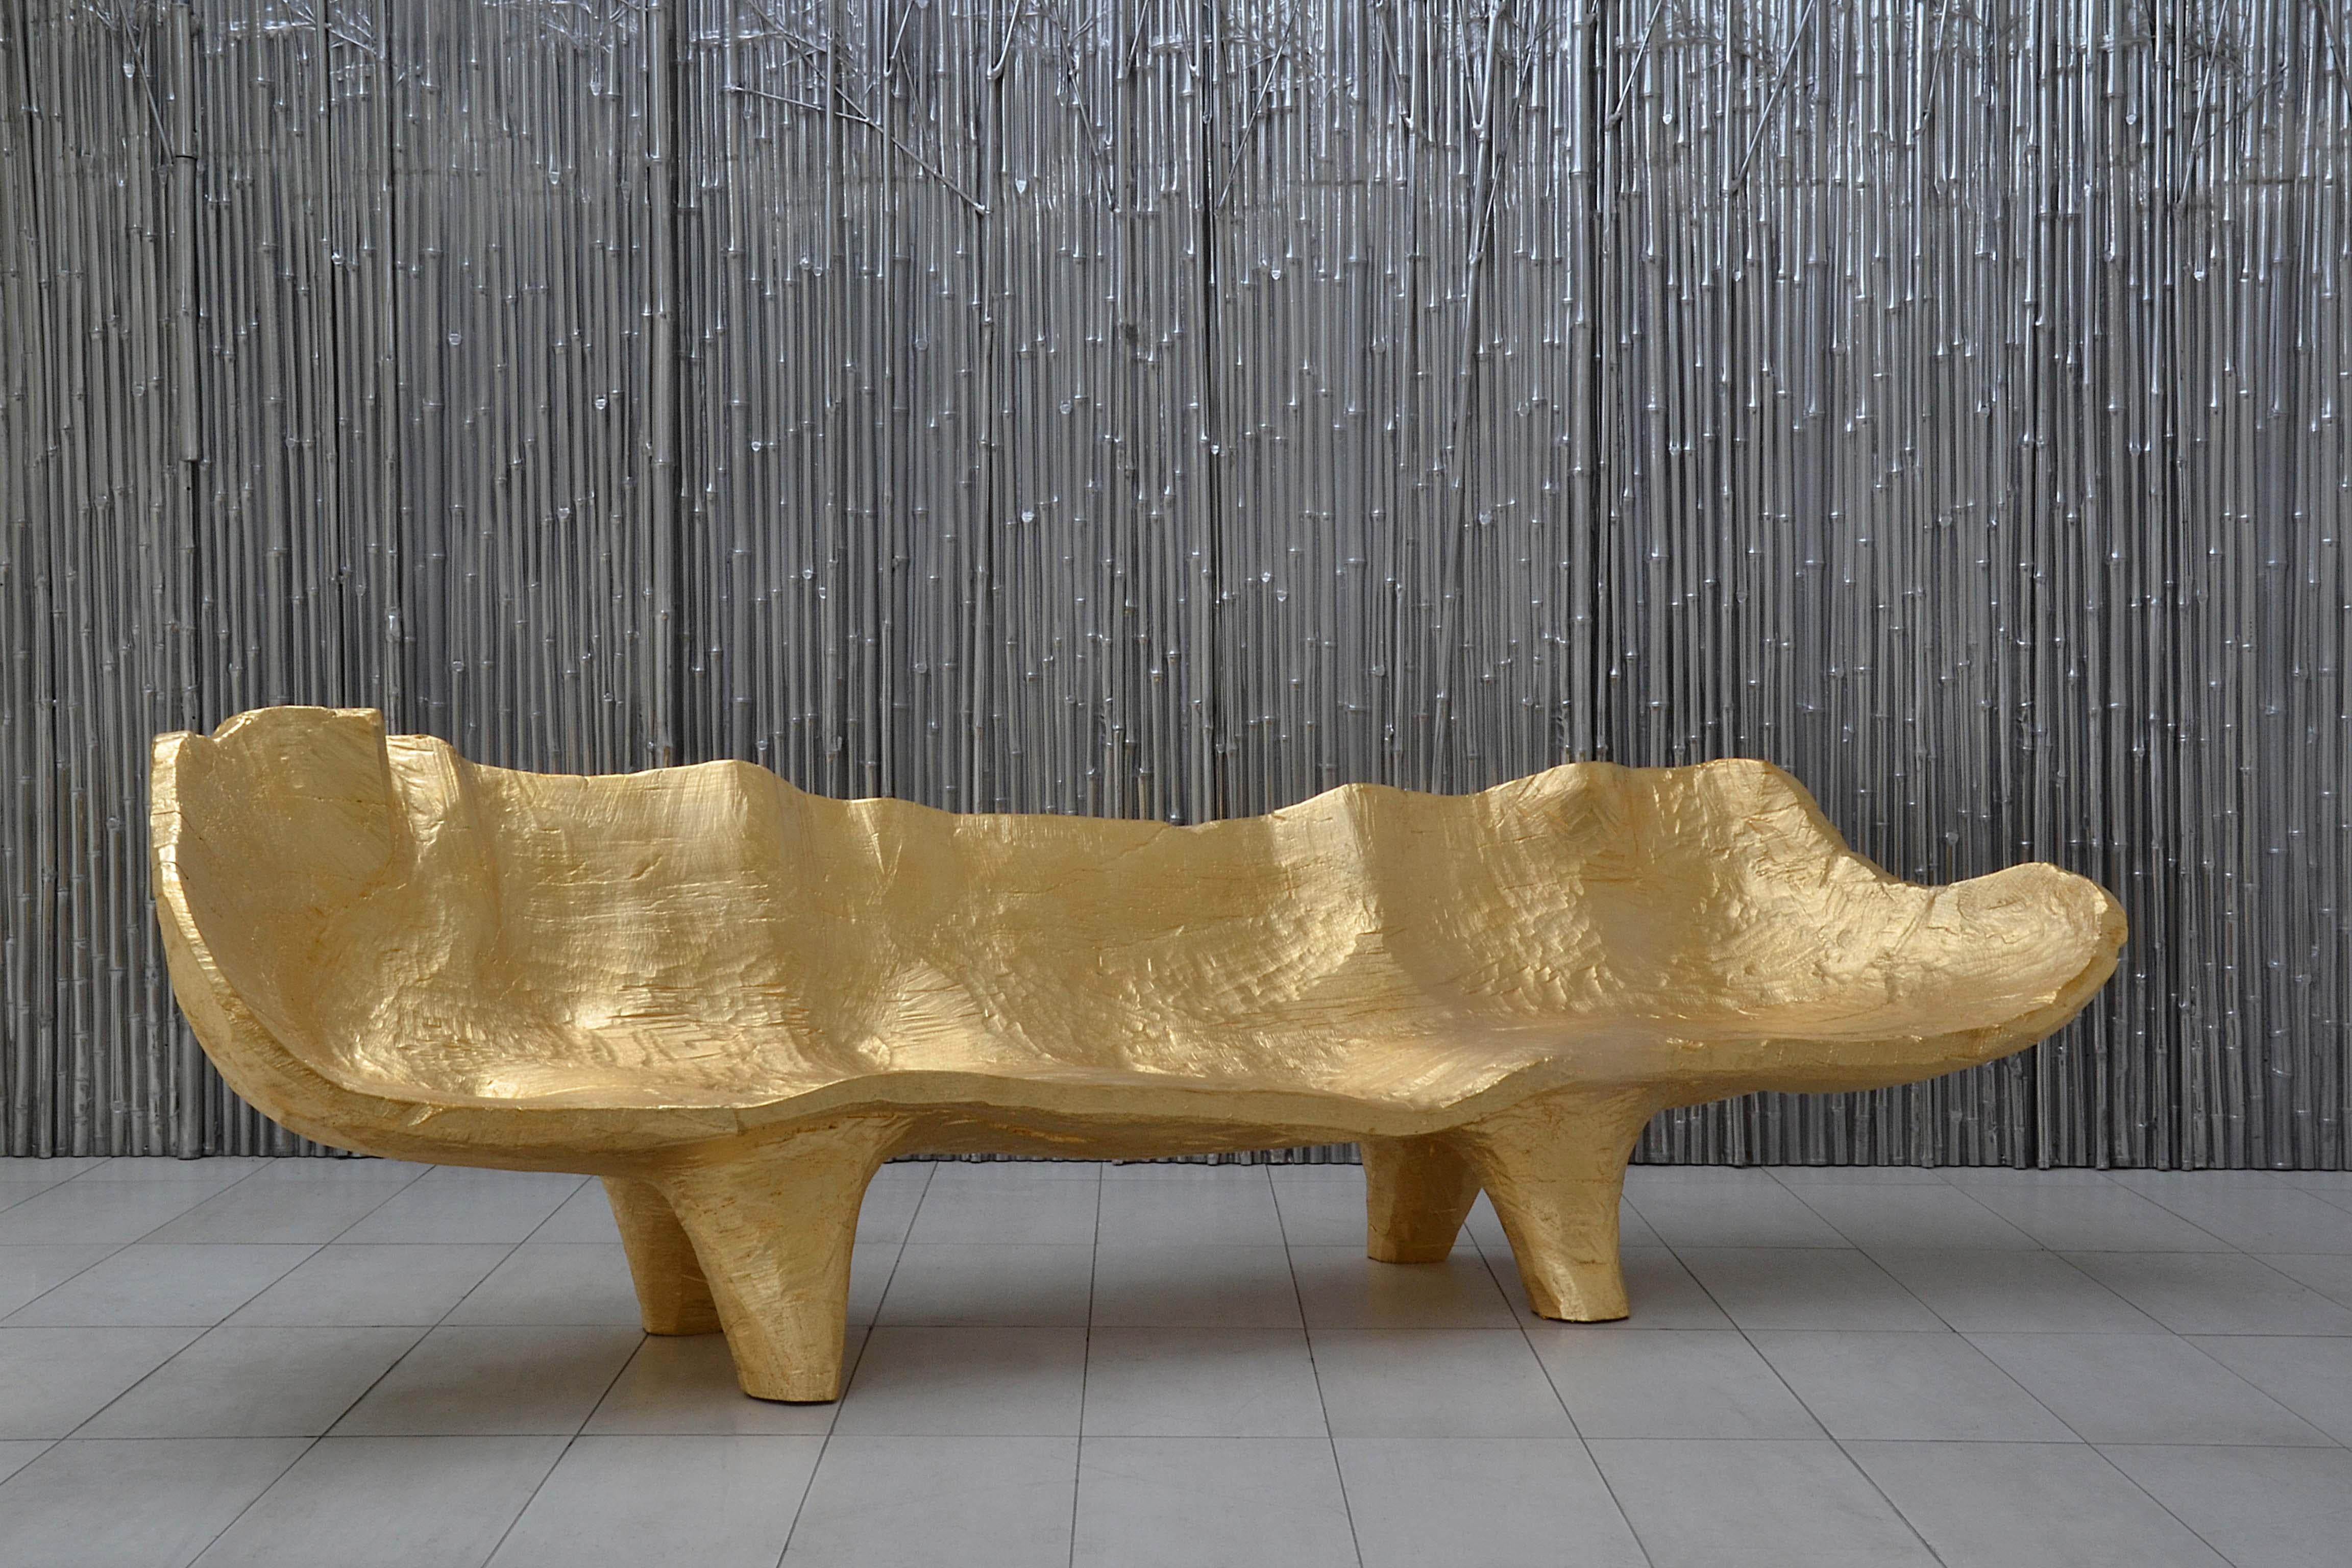 Sculptured sofa made by Andrea Salvetti for Dilmos Milano.
The sofa is cut from a solid piece of wood, carefully shaped by the hand of the designer using machete knives to evoke a luxurious sofa. The surface is completely covered in gold